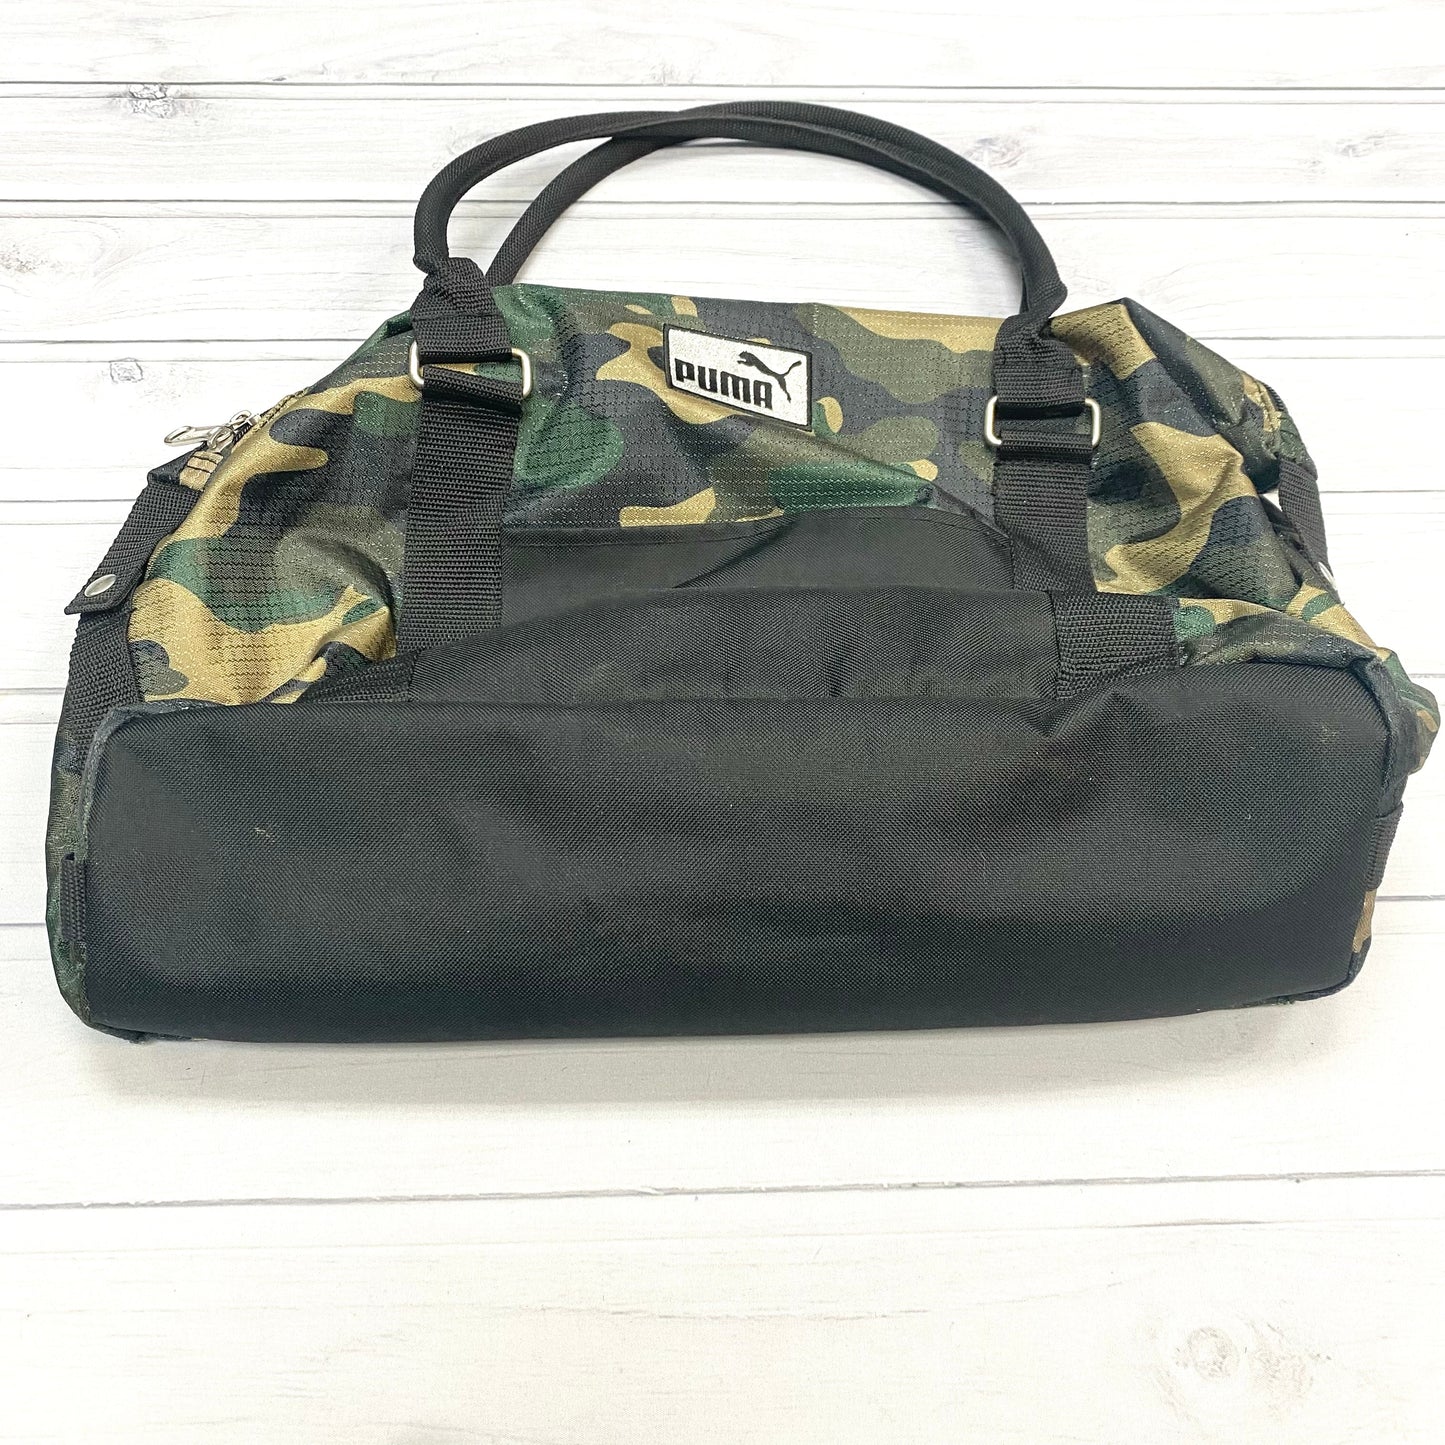 Duffle And Weekender By Puma  Size: Medium